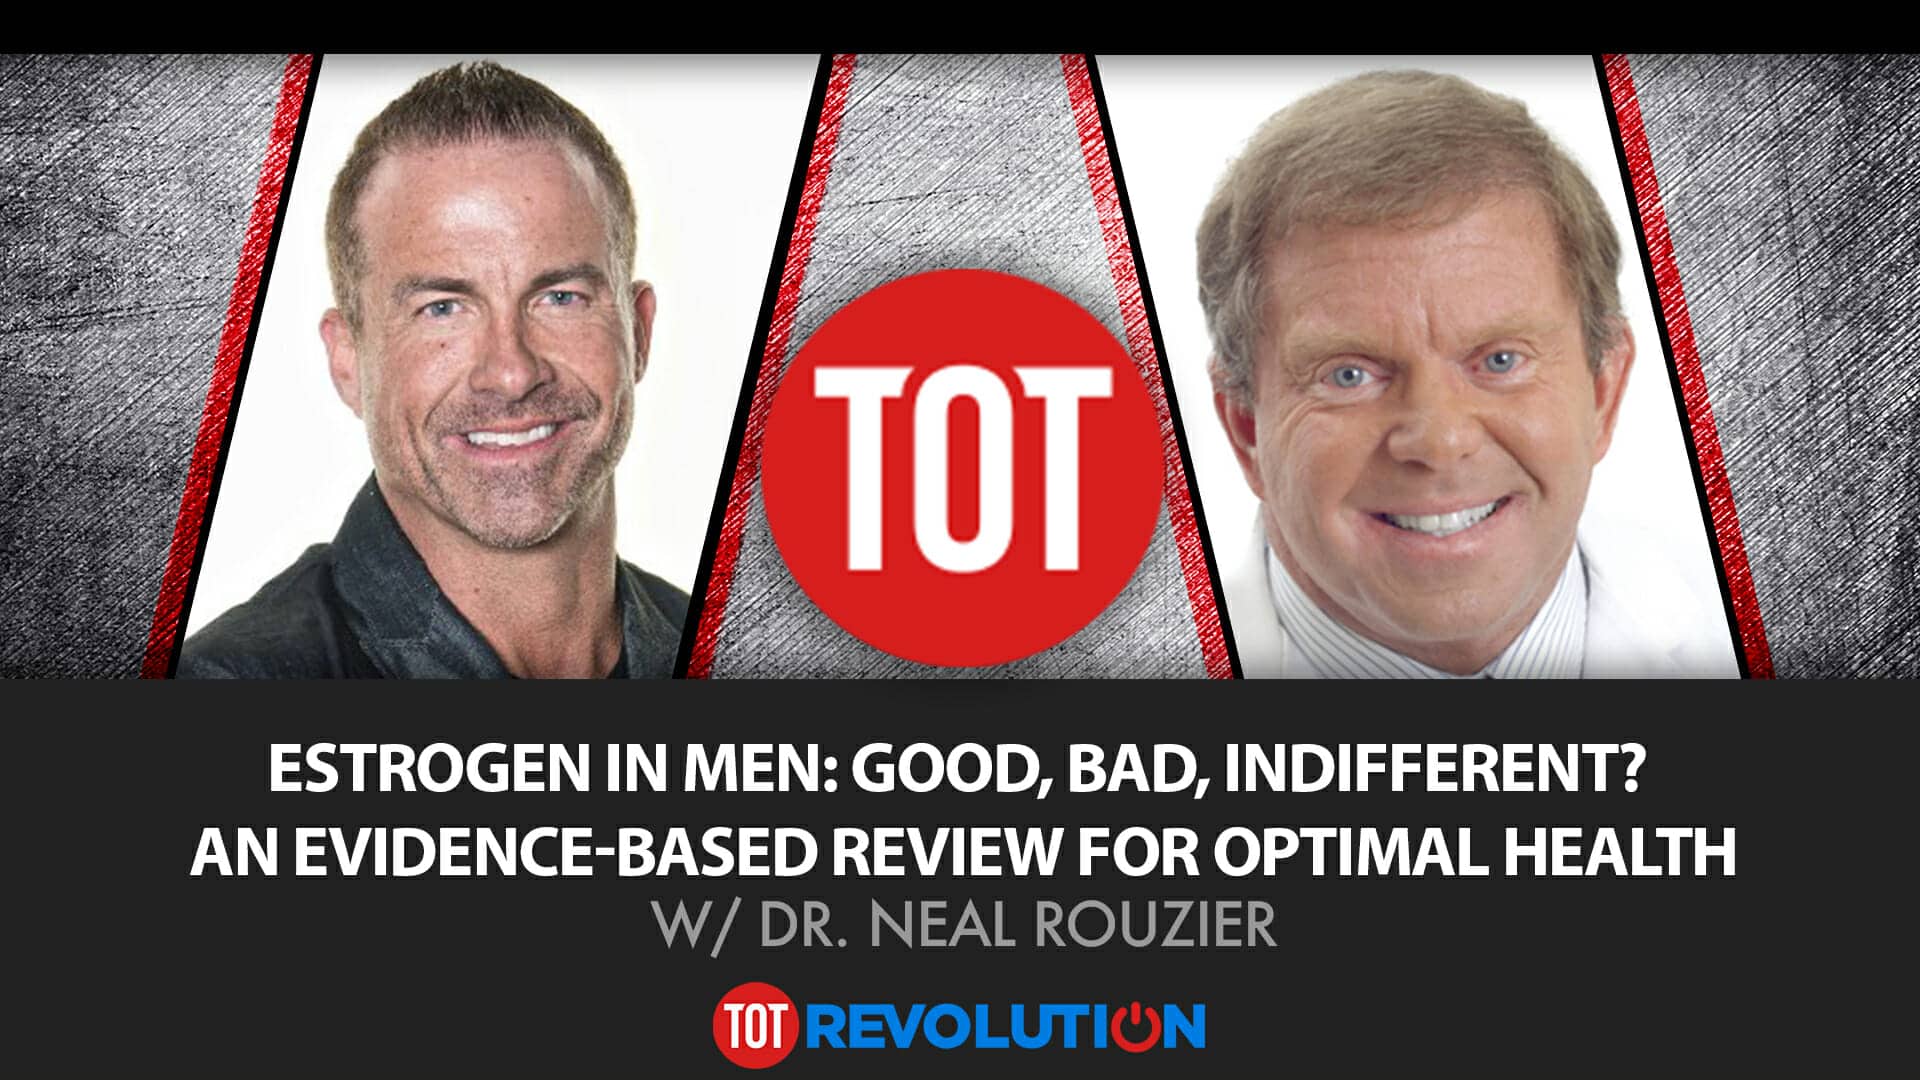 Estrogen In Men: Good, Bad, Indifferent? An Evidence-Based Review for Optimal Health w/Dr. Neal Rouzier Part 1